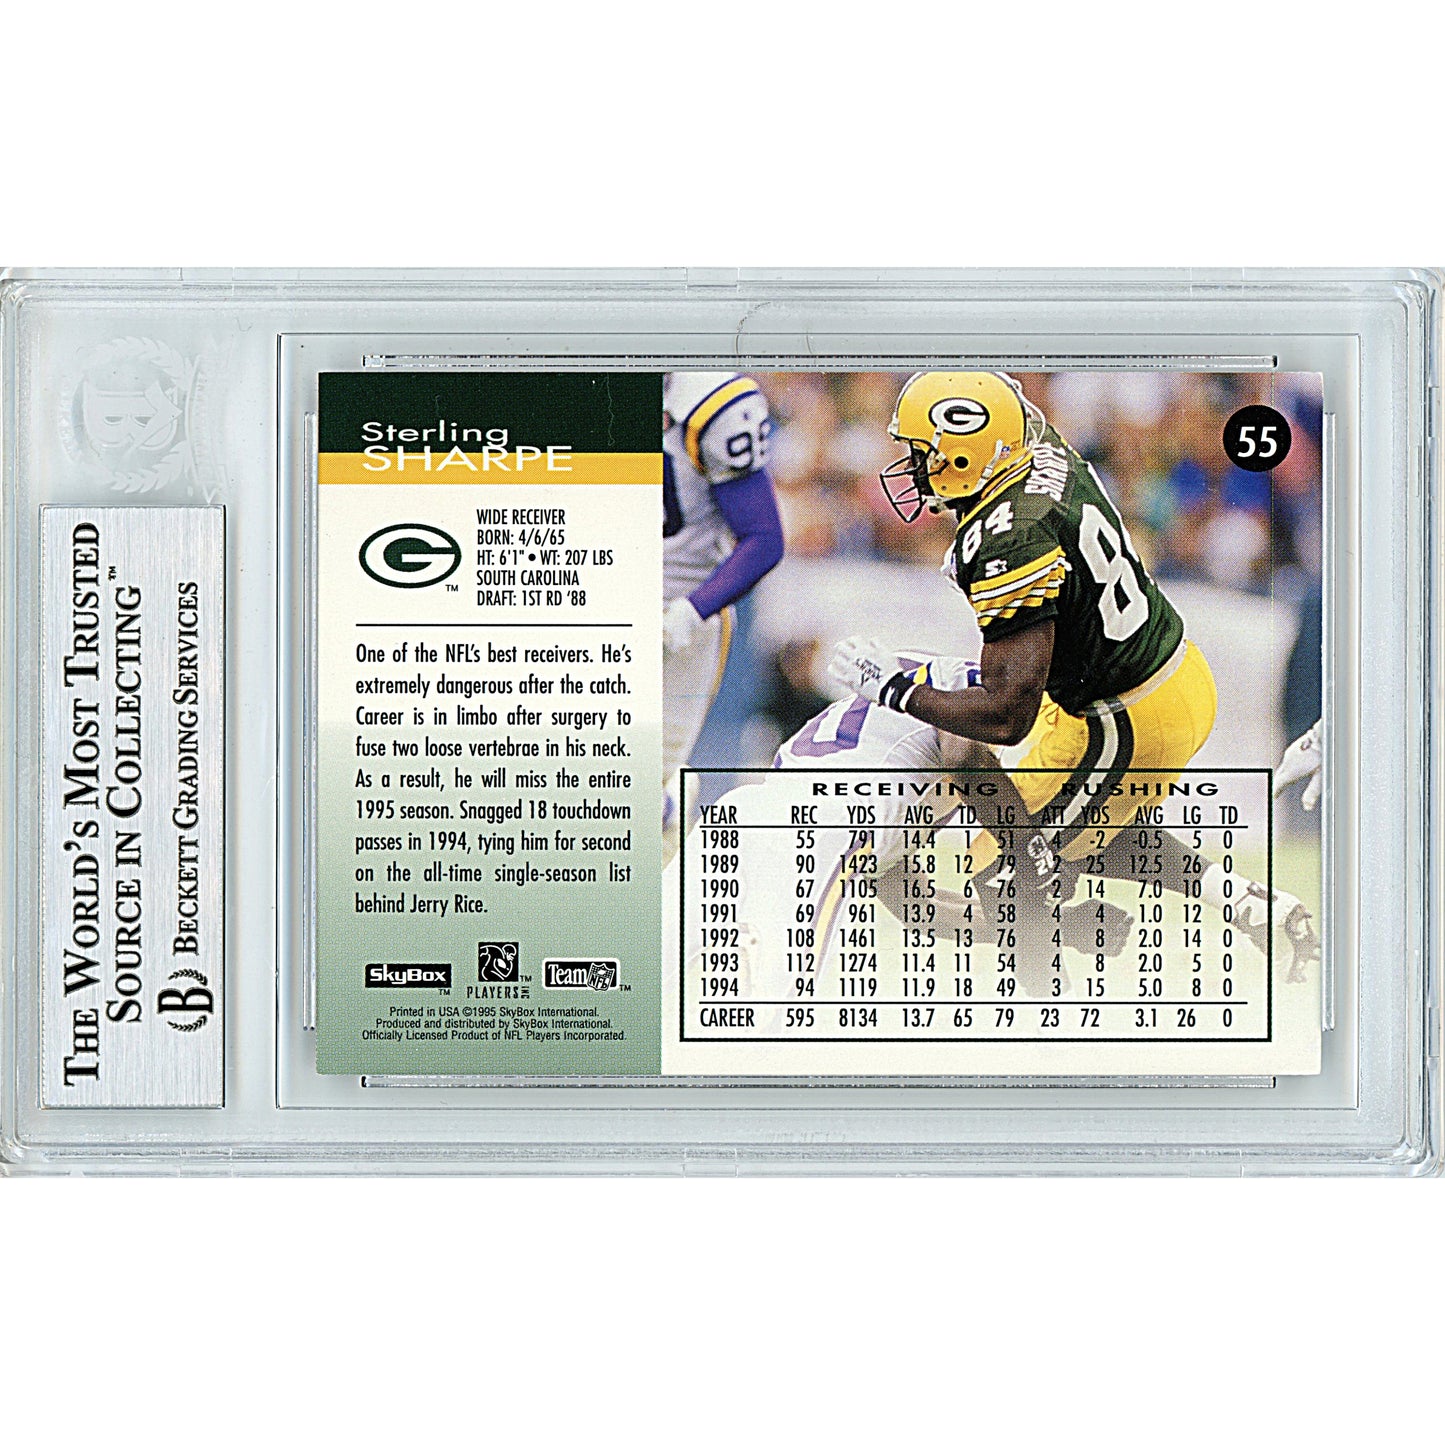 Footballs- Autographed- Sterling Sharpe Signed Green Bay Packers 1995 Skybox Impact Football Card Beckett BAS Slabbed 00014225859 - 103